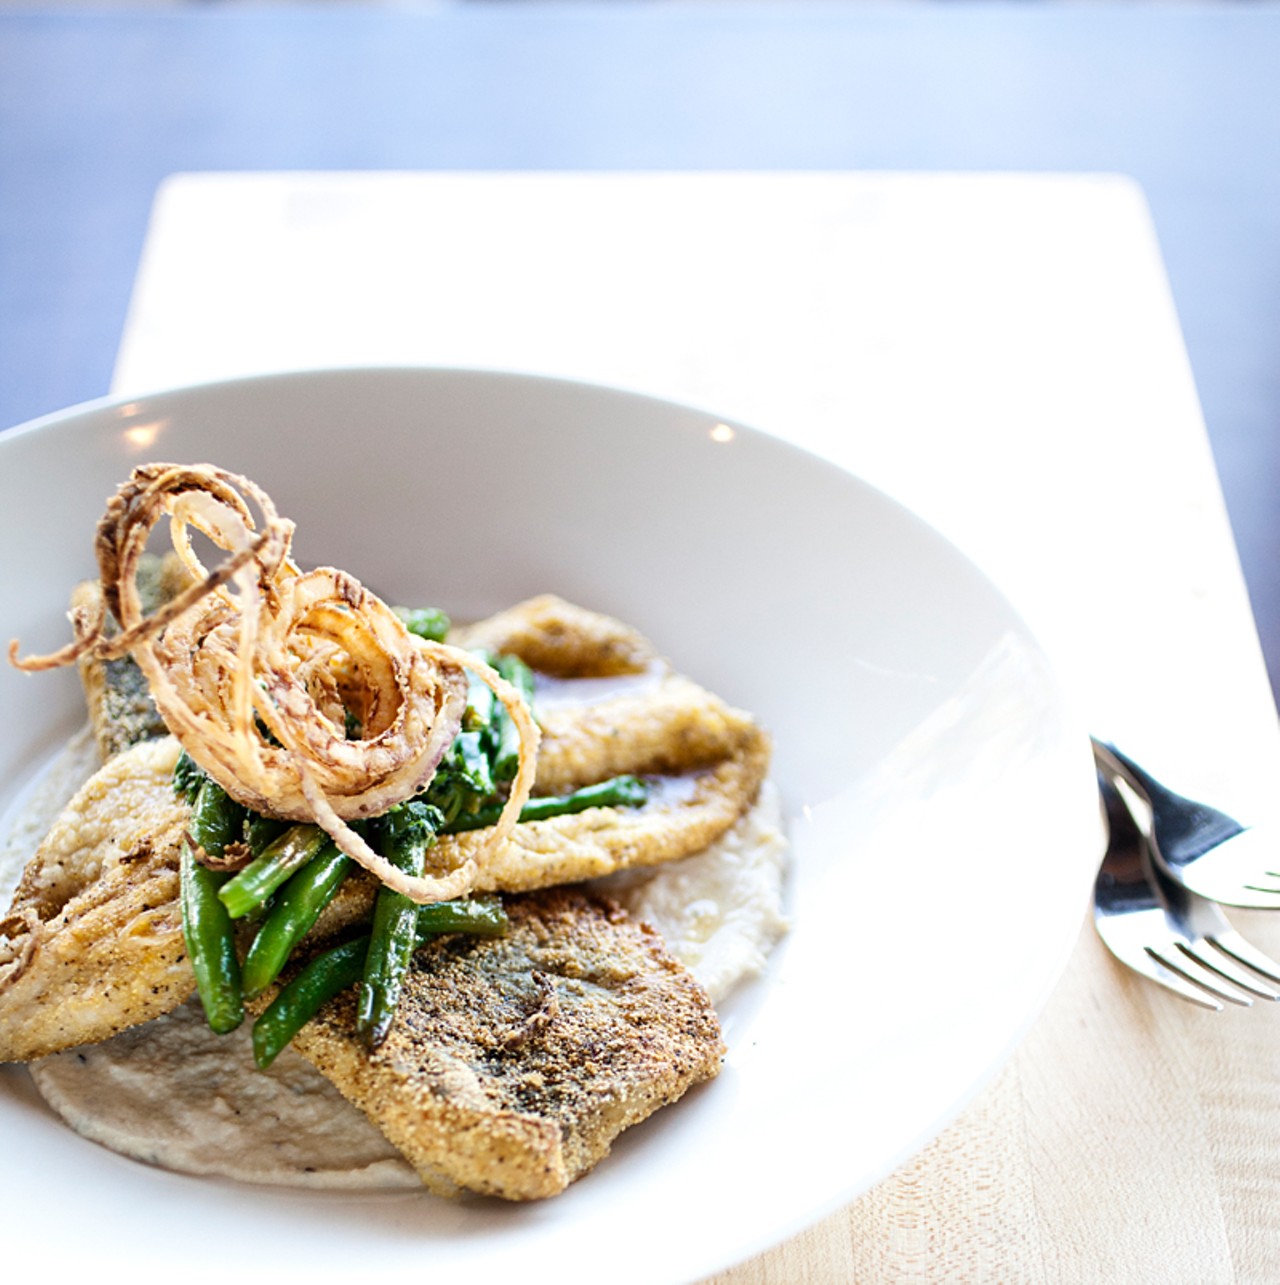 The Missouri trout at the Block is cornmeal-encrusted with roasted cauliflower, green beans, crispy onions and herb butter.